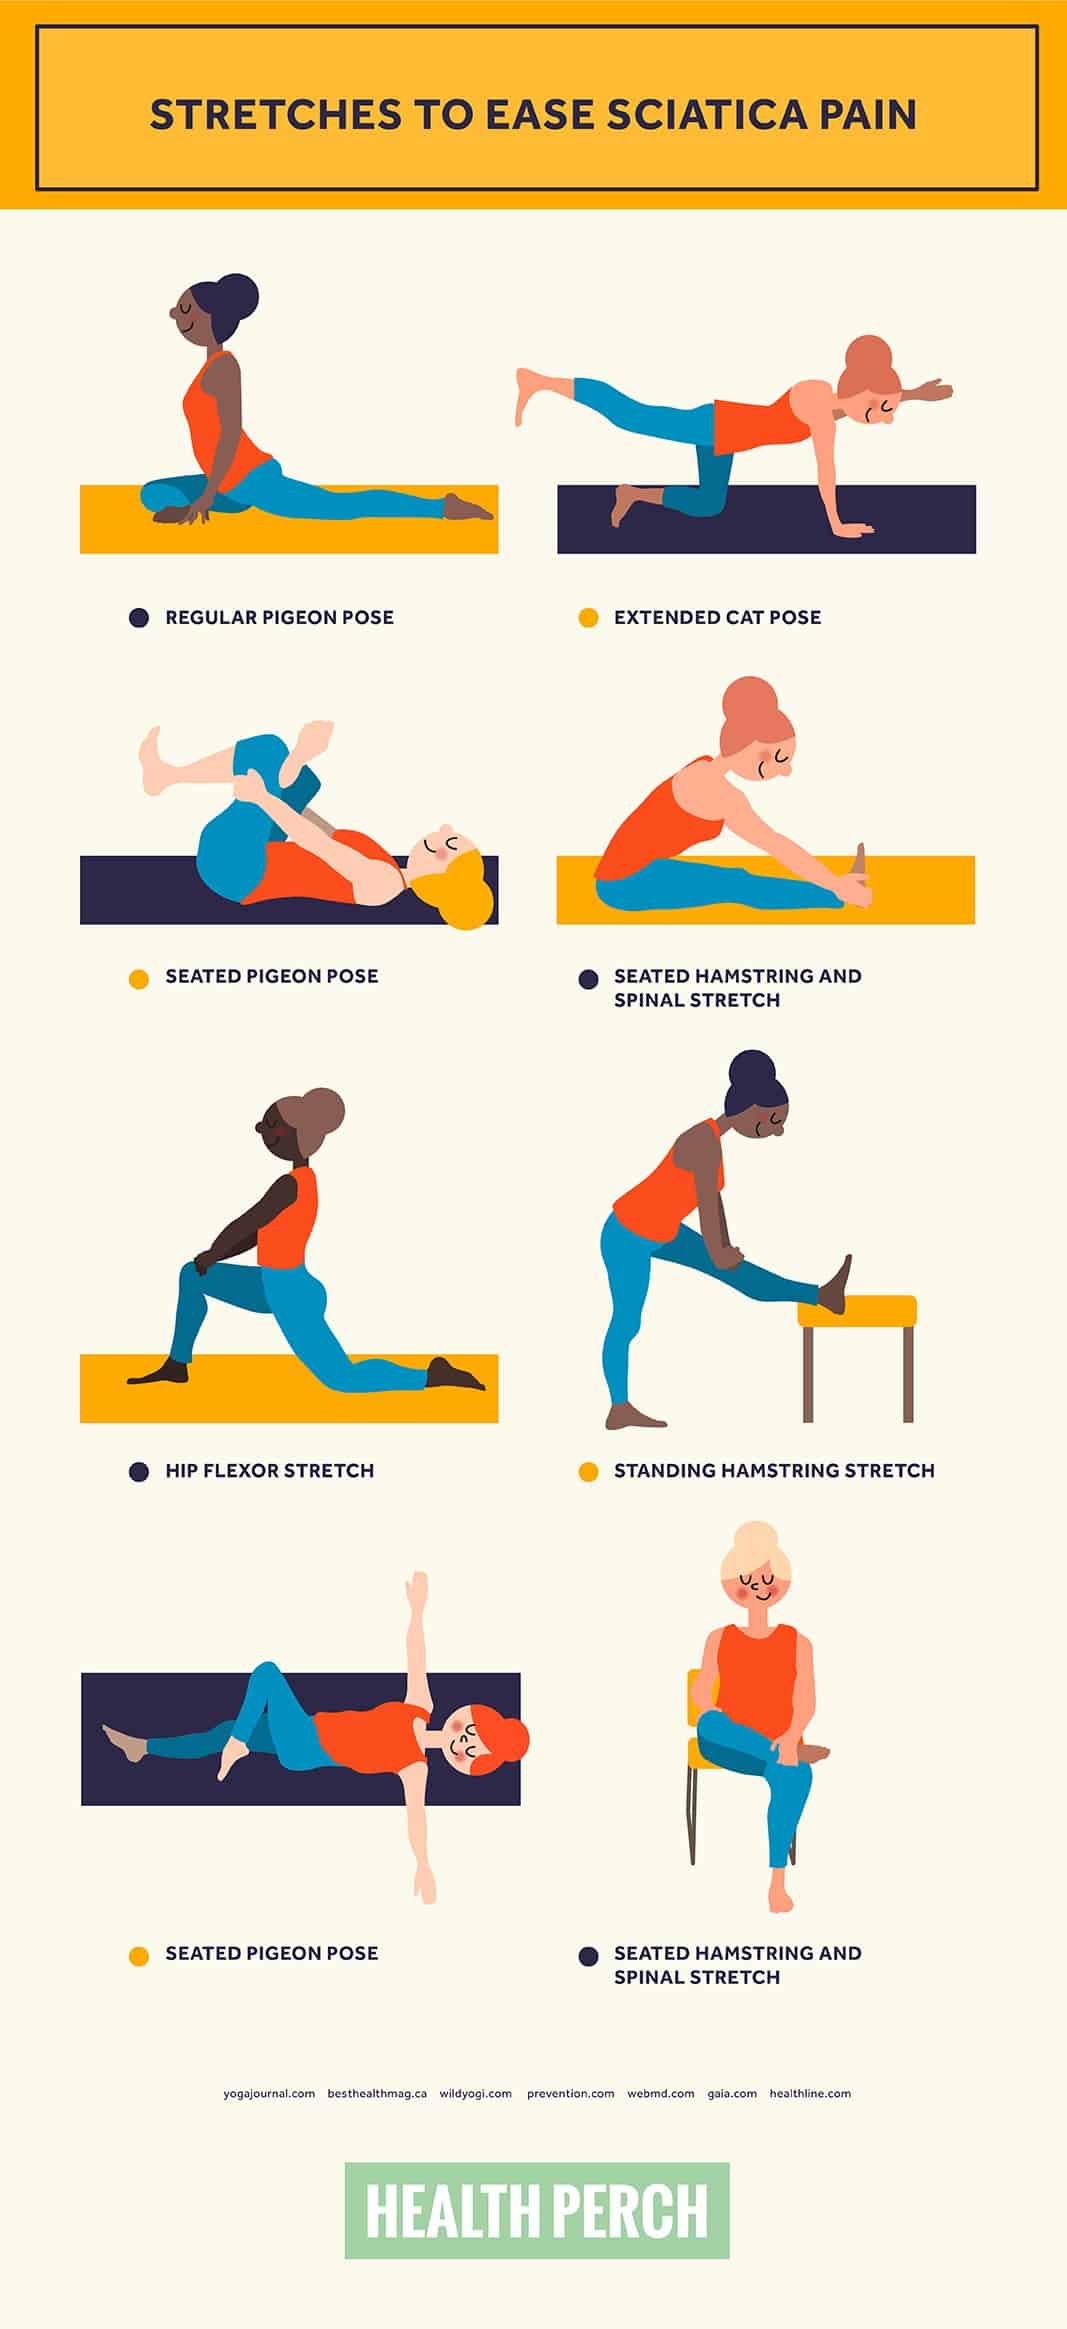 4 Exercises that Can Help Relieve Sciatica Pain - Arkansas Surgical Hospital